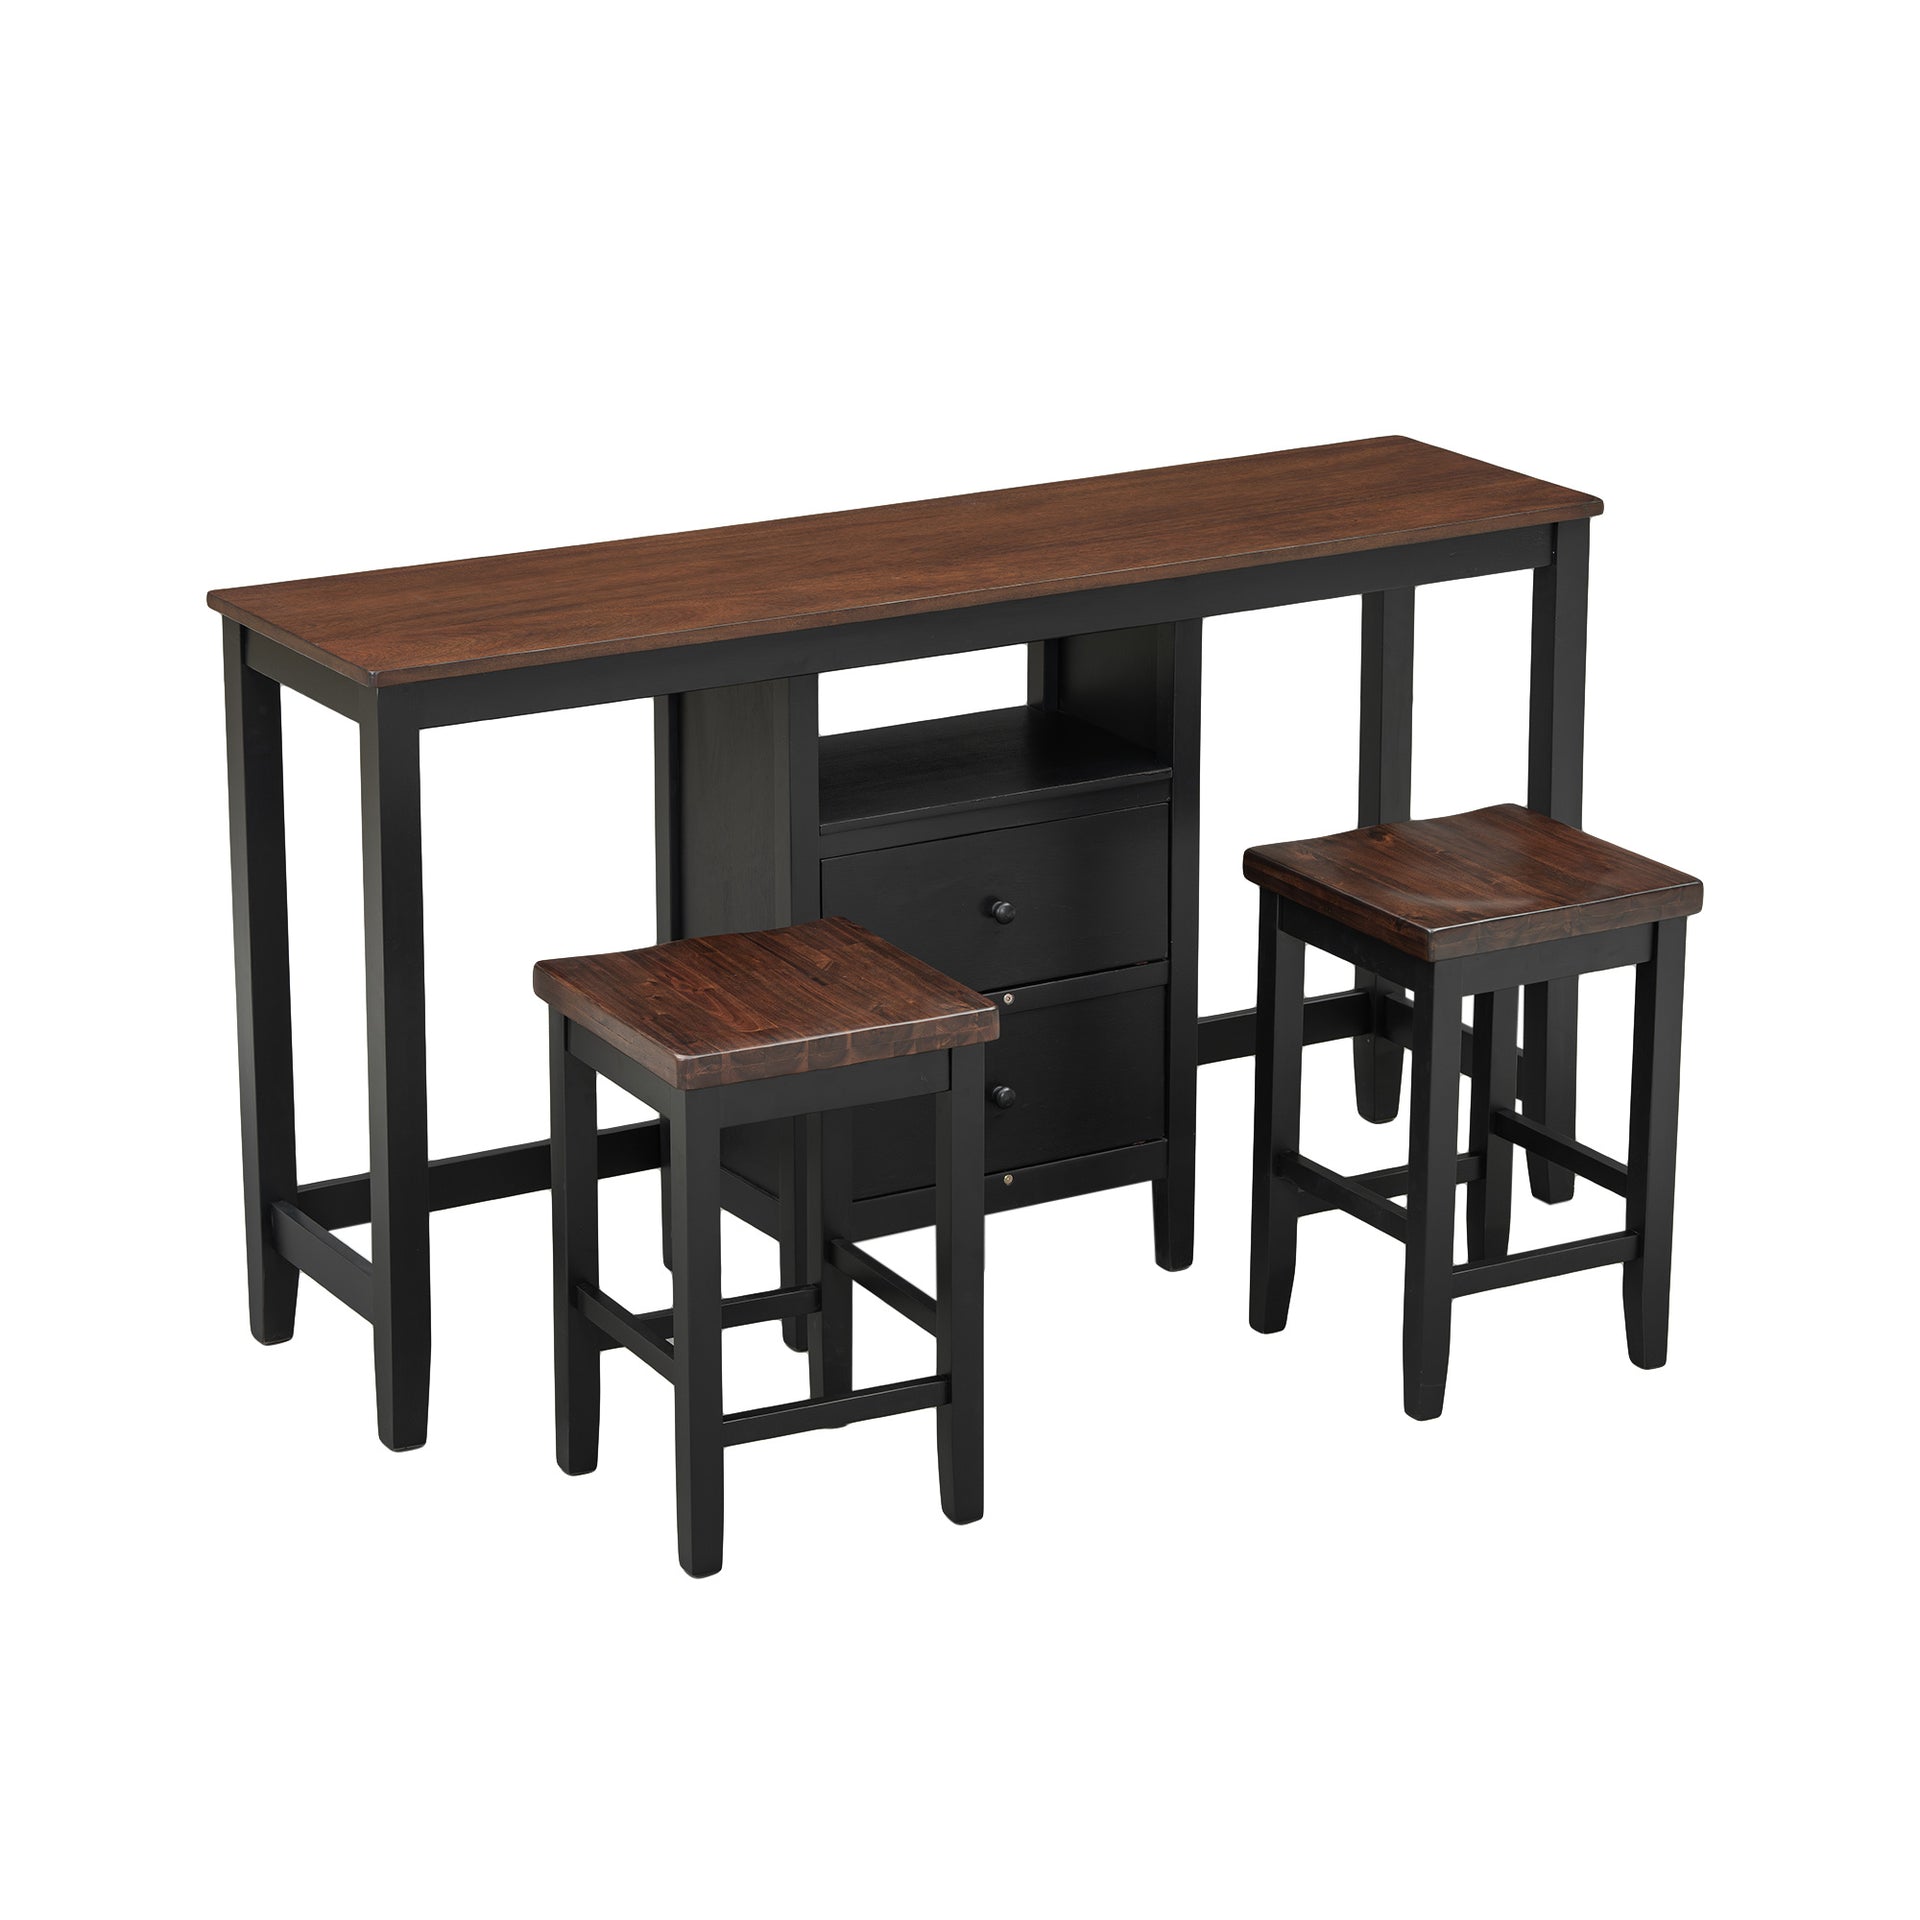 Rustic 3-piece Wood Dining Set with Storage